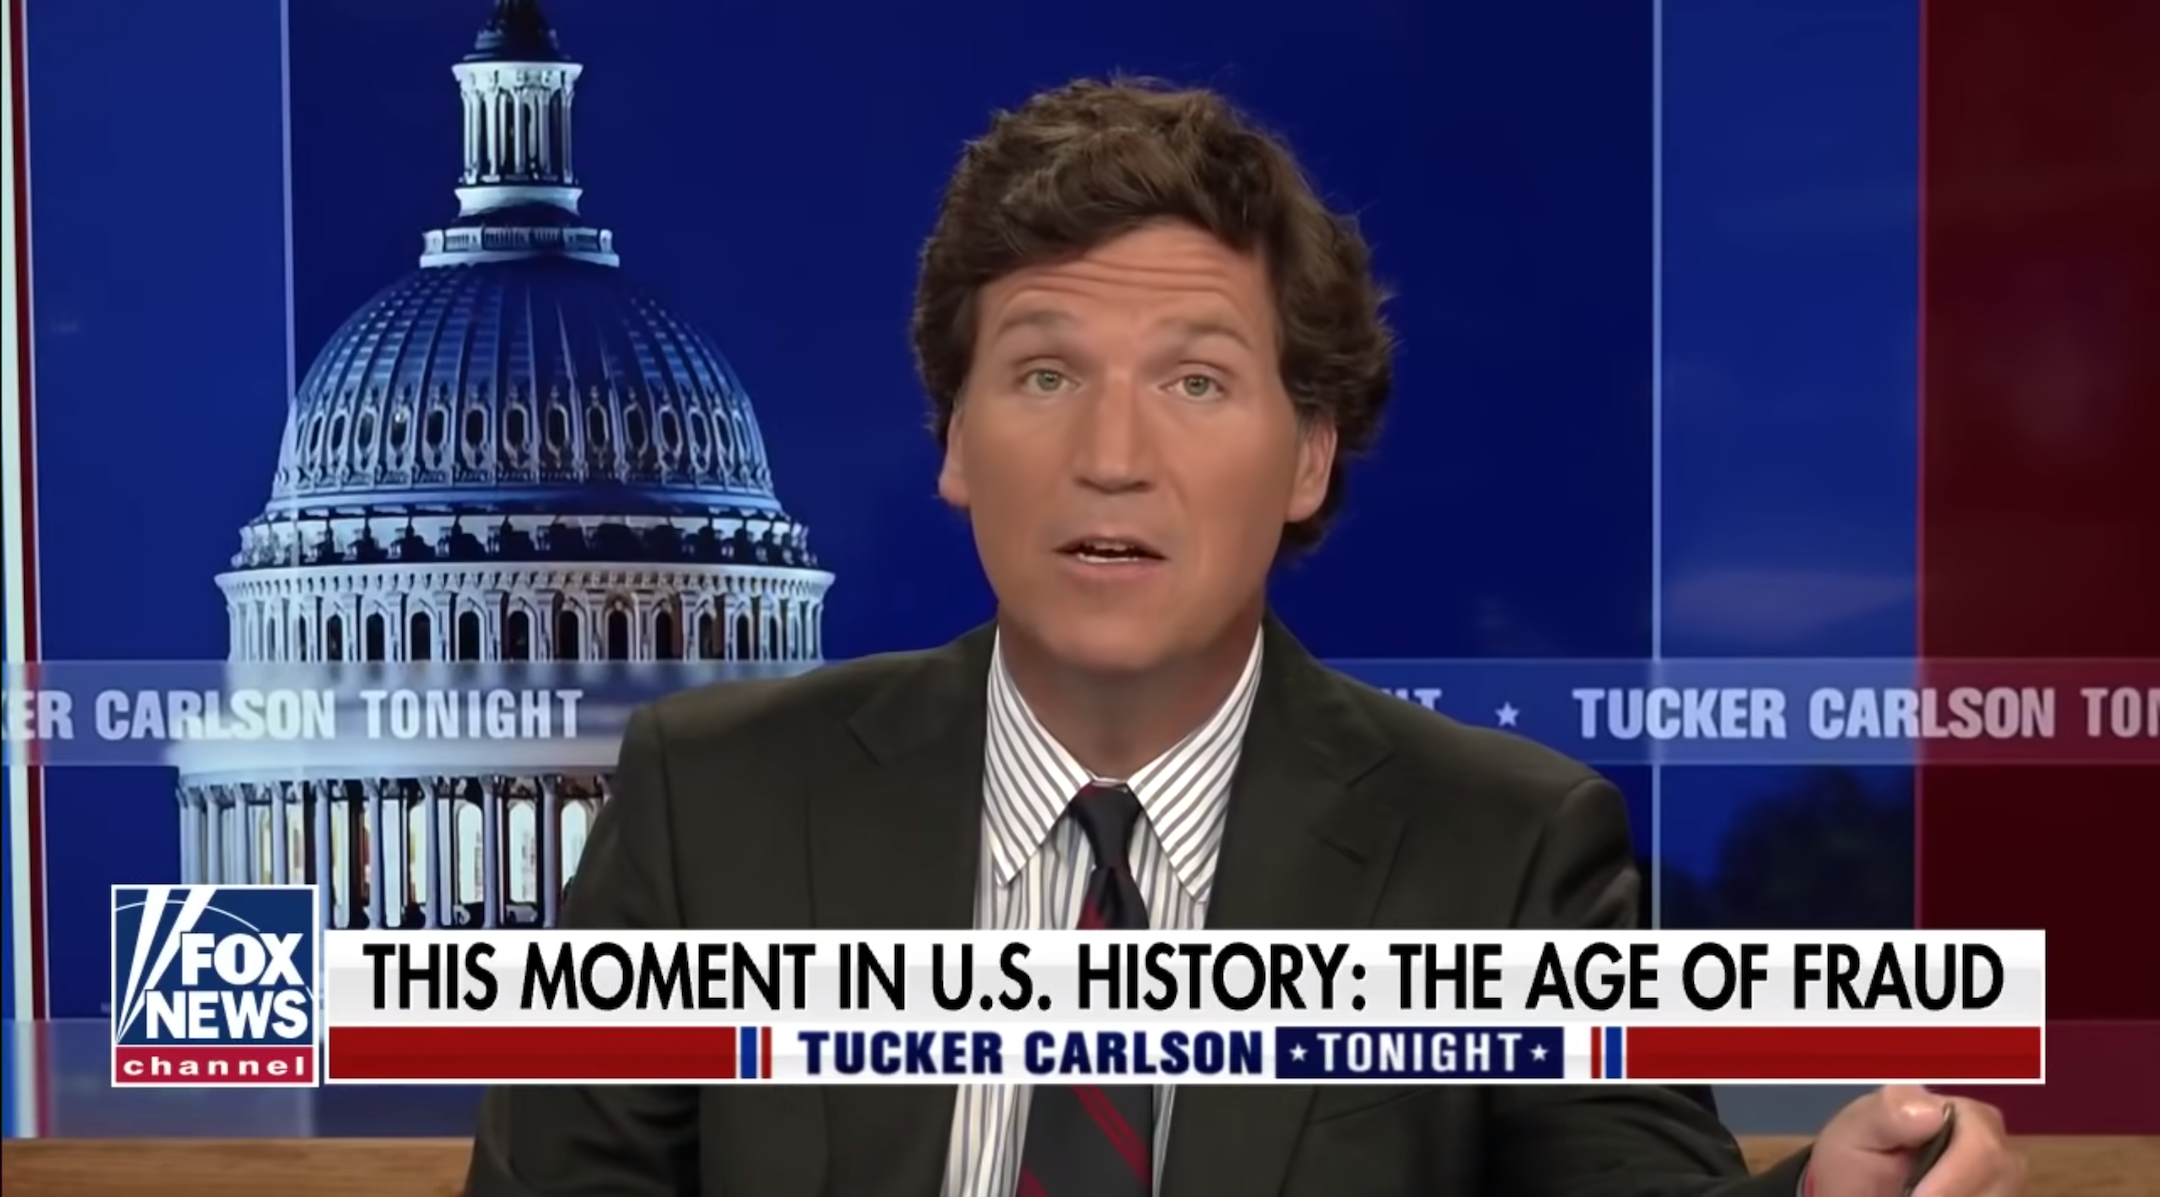 Tucker Carlson speaking on Fox News on April 9, 2021. Carlson’s comments about immigrants prompted the Anti-Defamation League to call for his firing. (Screen shot)